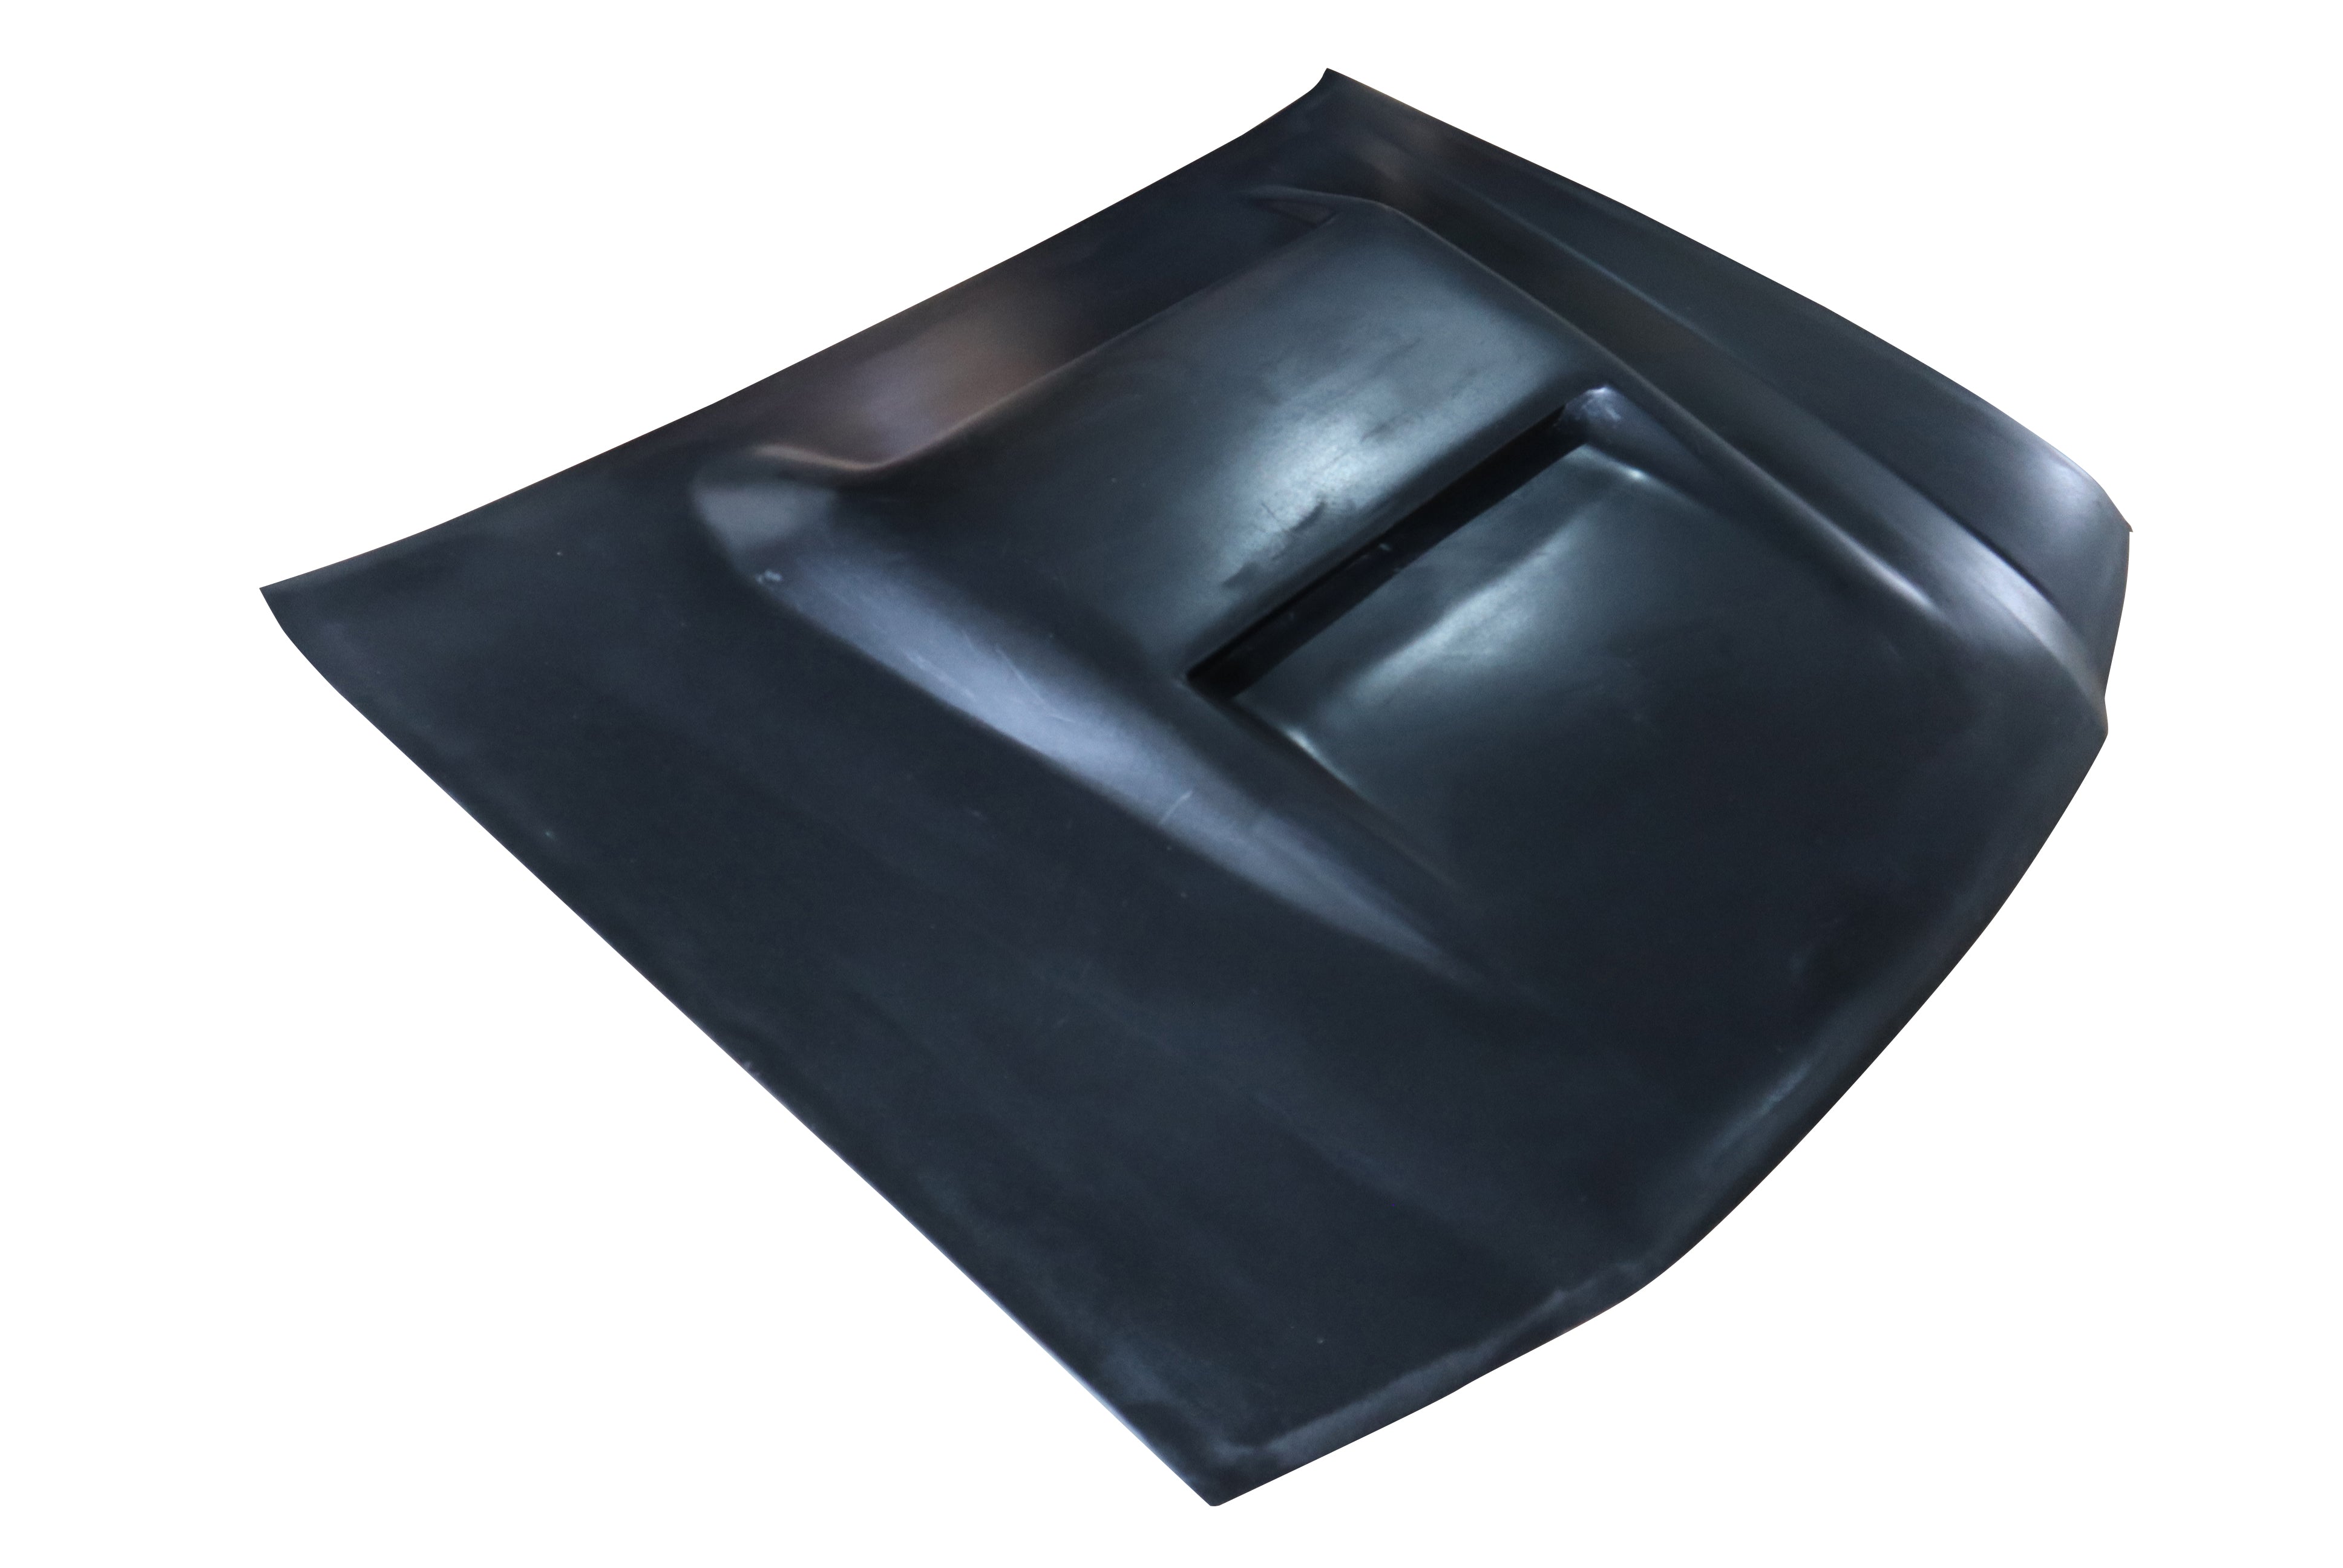 100 & 105 Series Bonnet with 79 Style Scoop